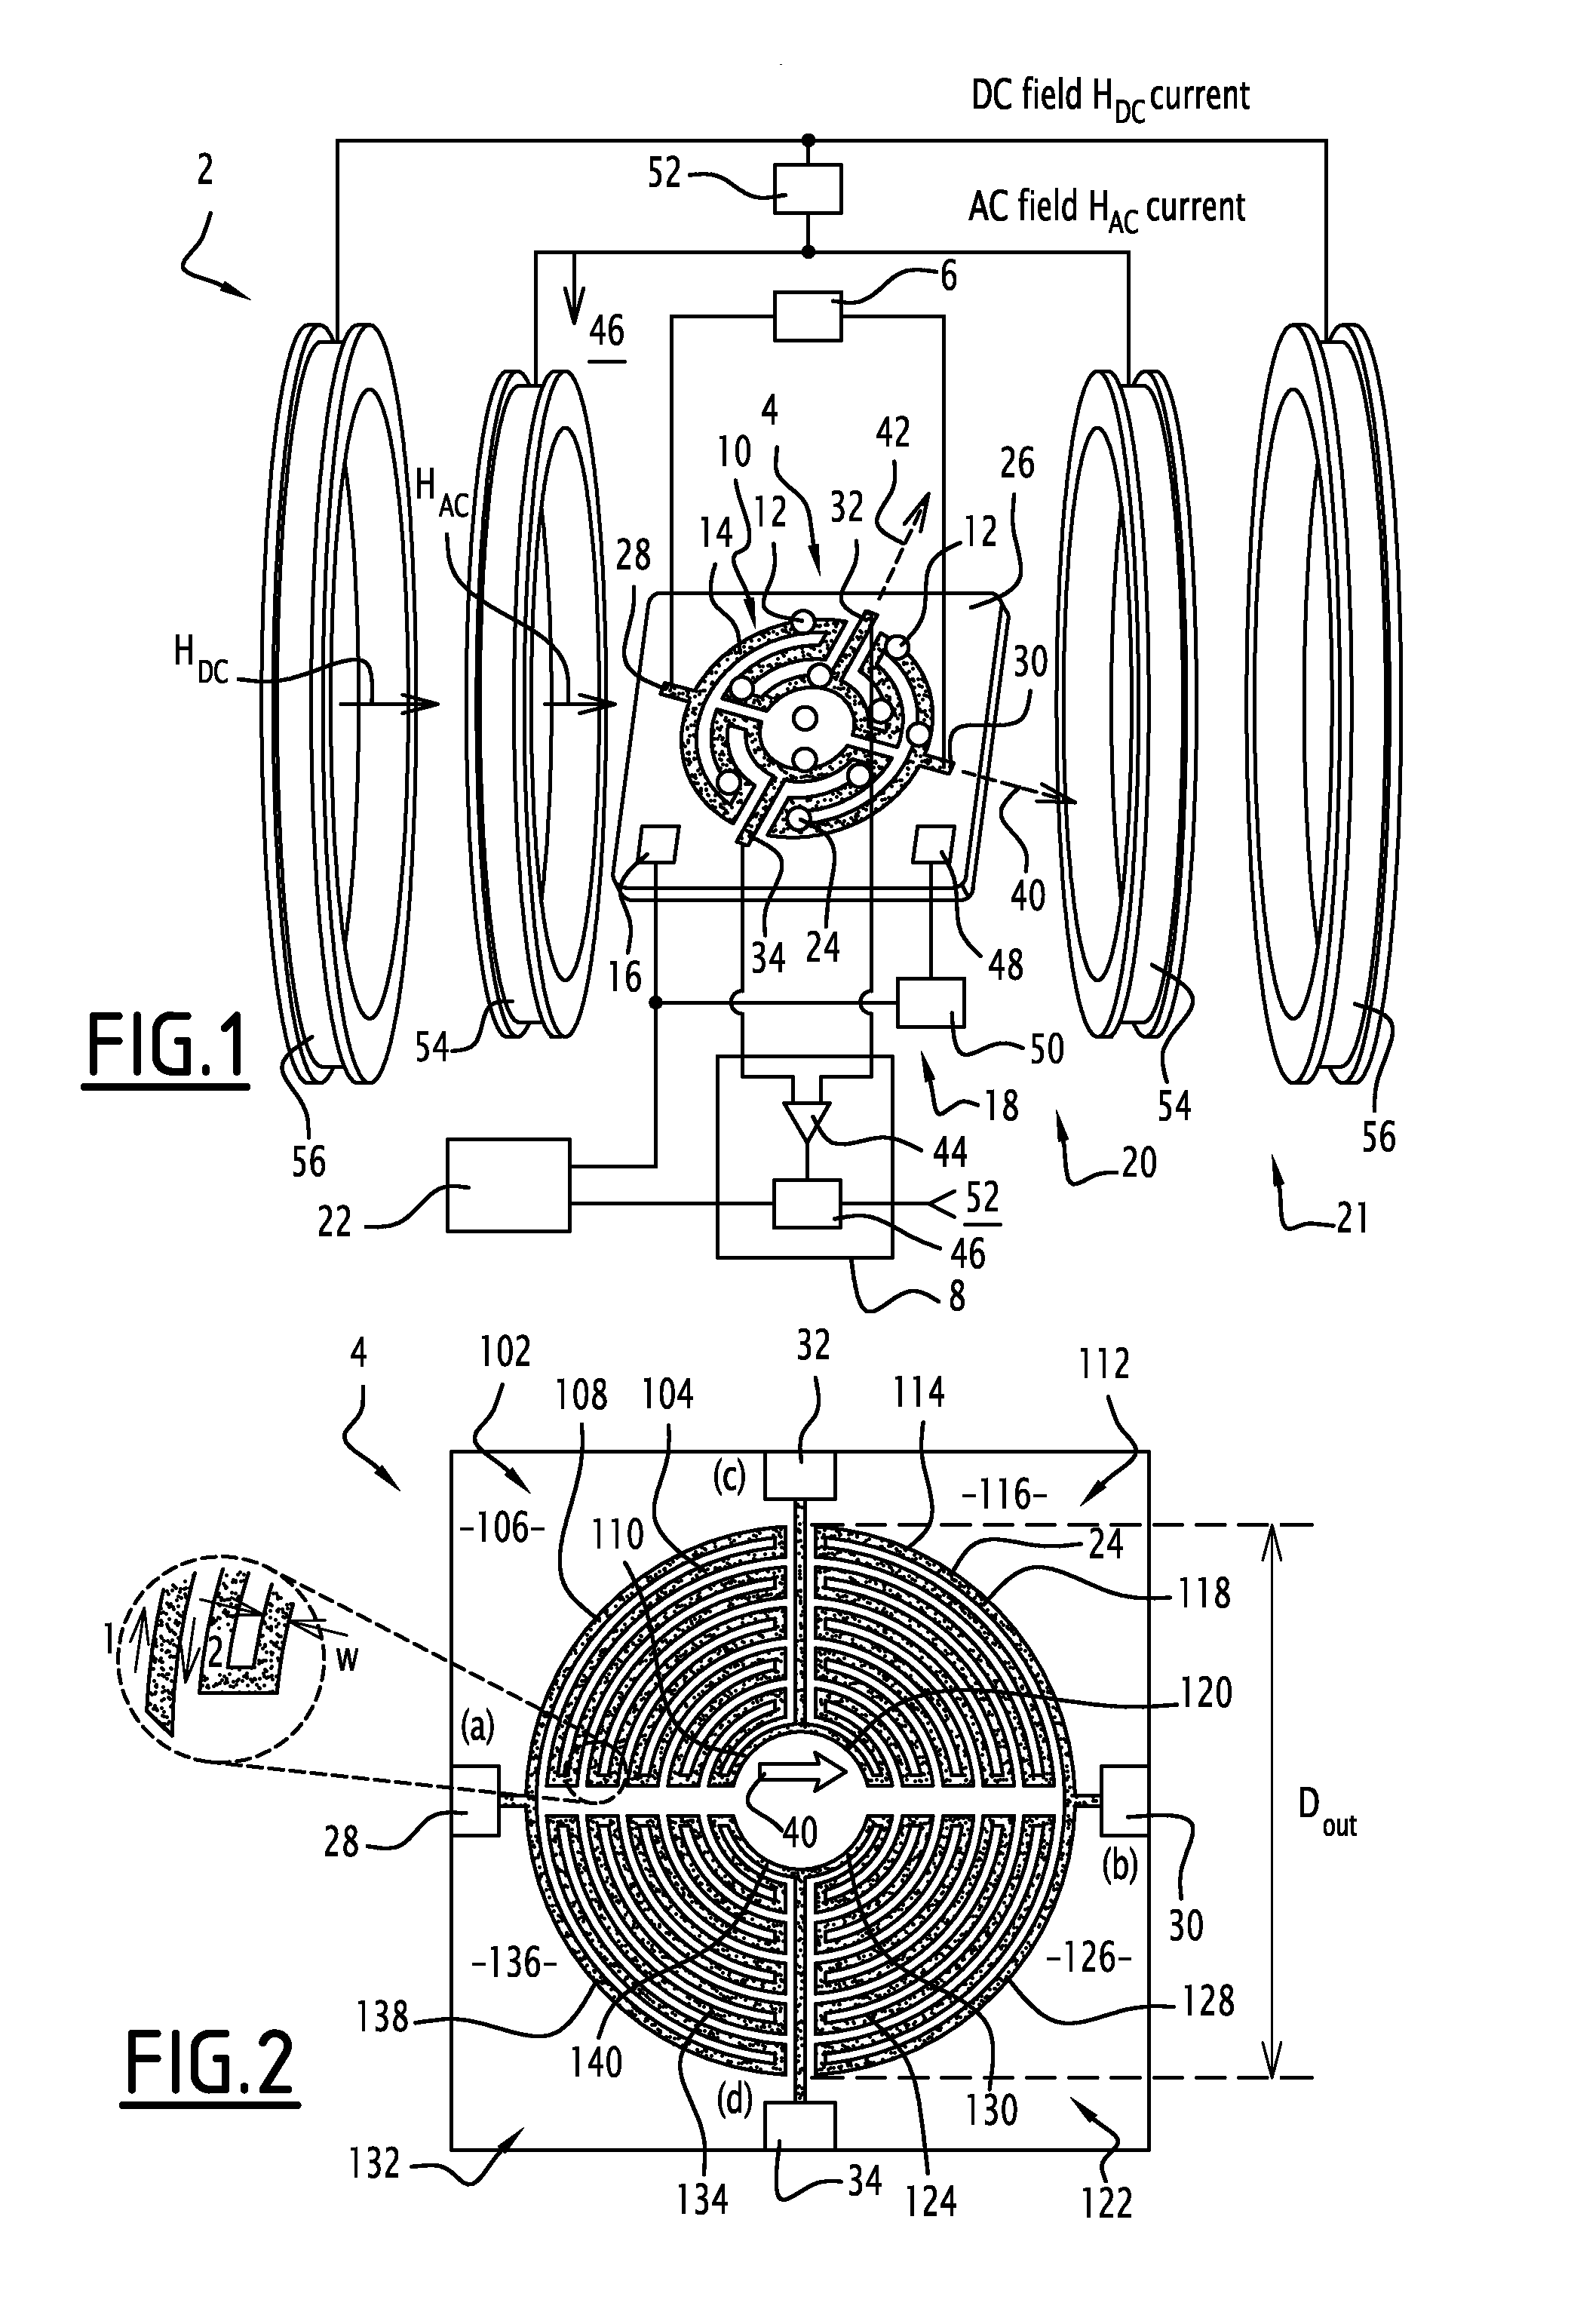 Micromagnetometry detection system and method for detecting magnetic signatures of magnetic materials